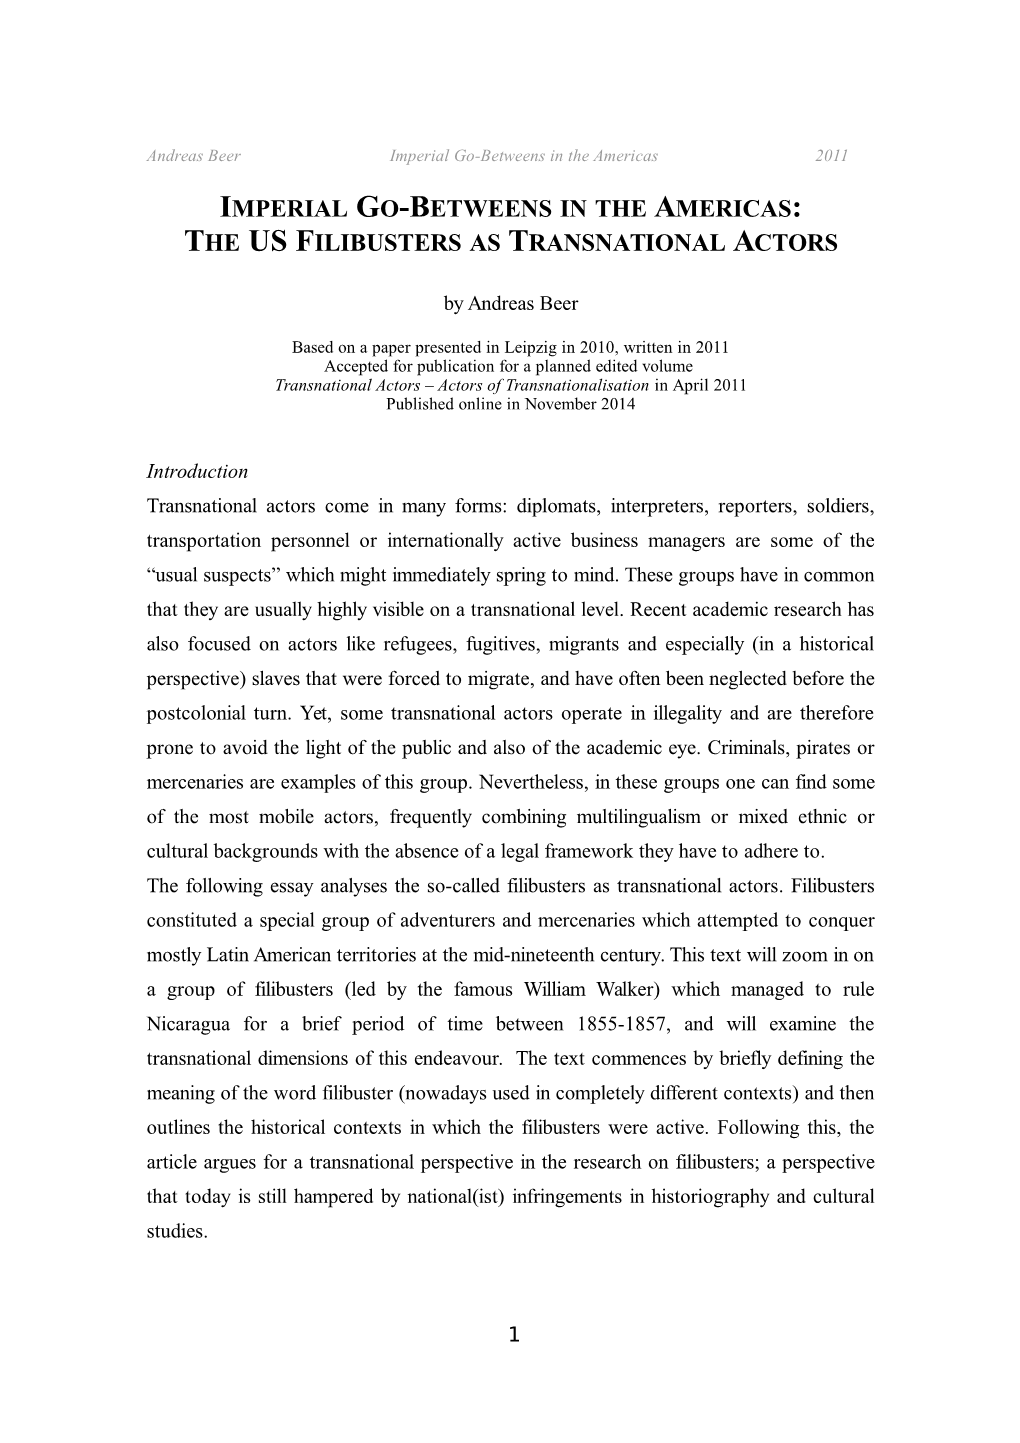 Imperial Go-Betweens in the Americas: the Us Filibusters As Transnational Actors